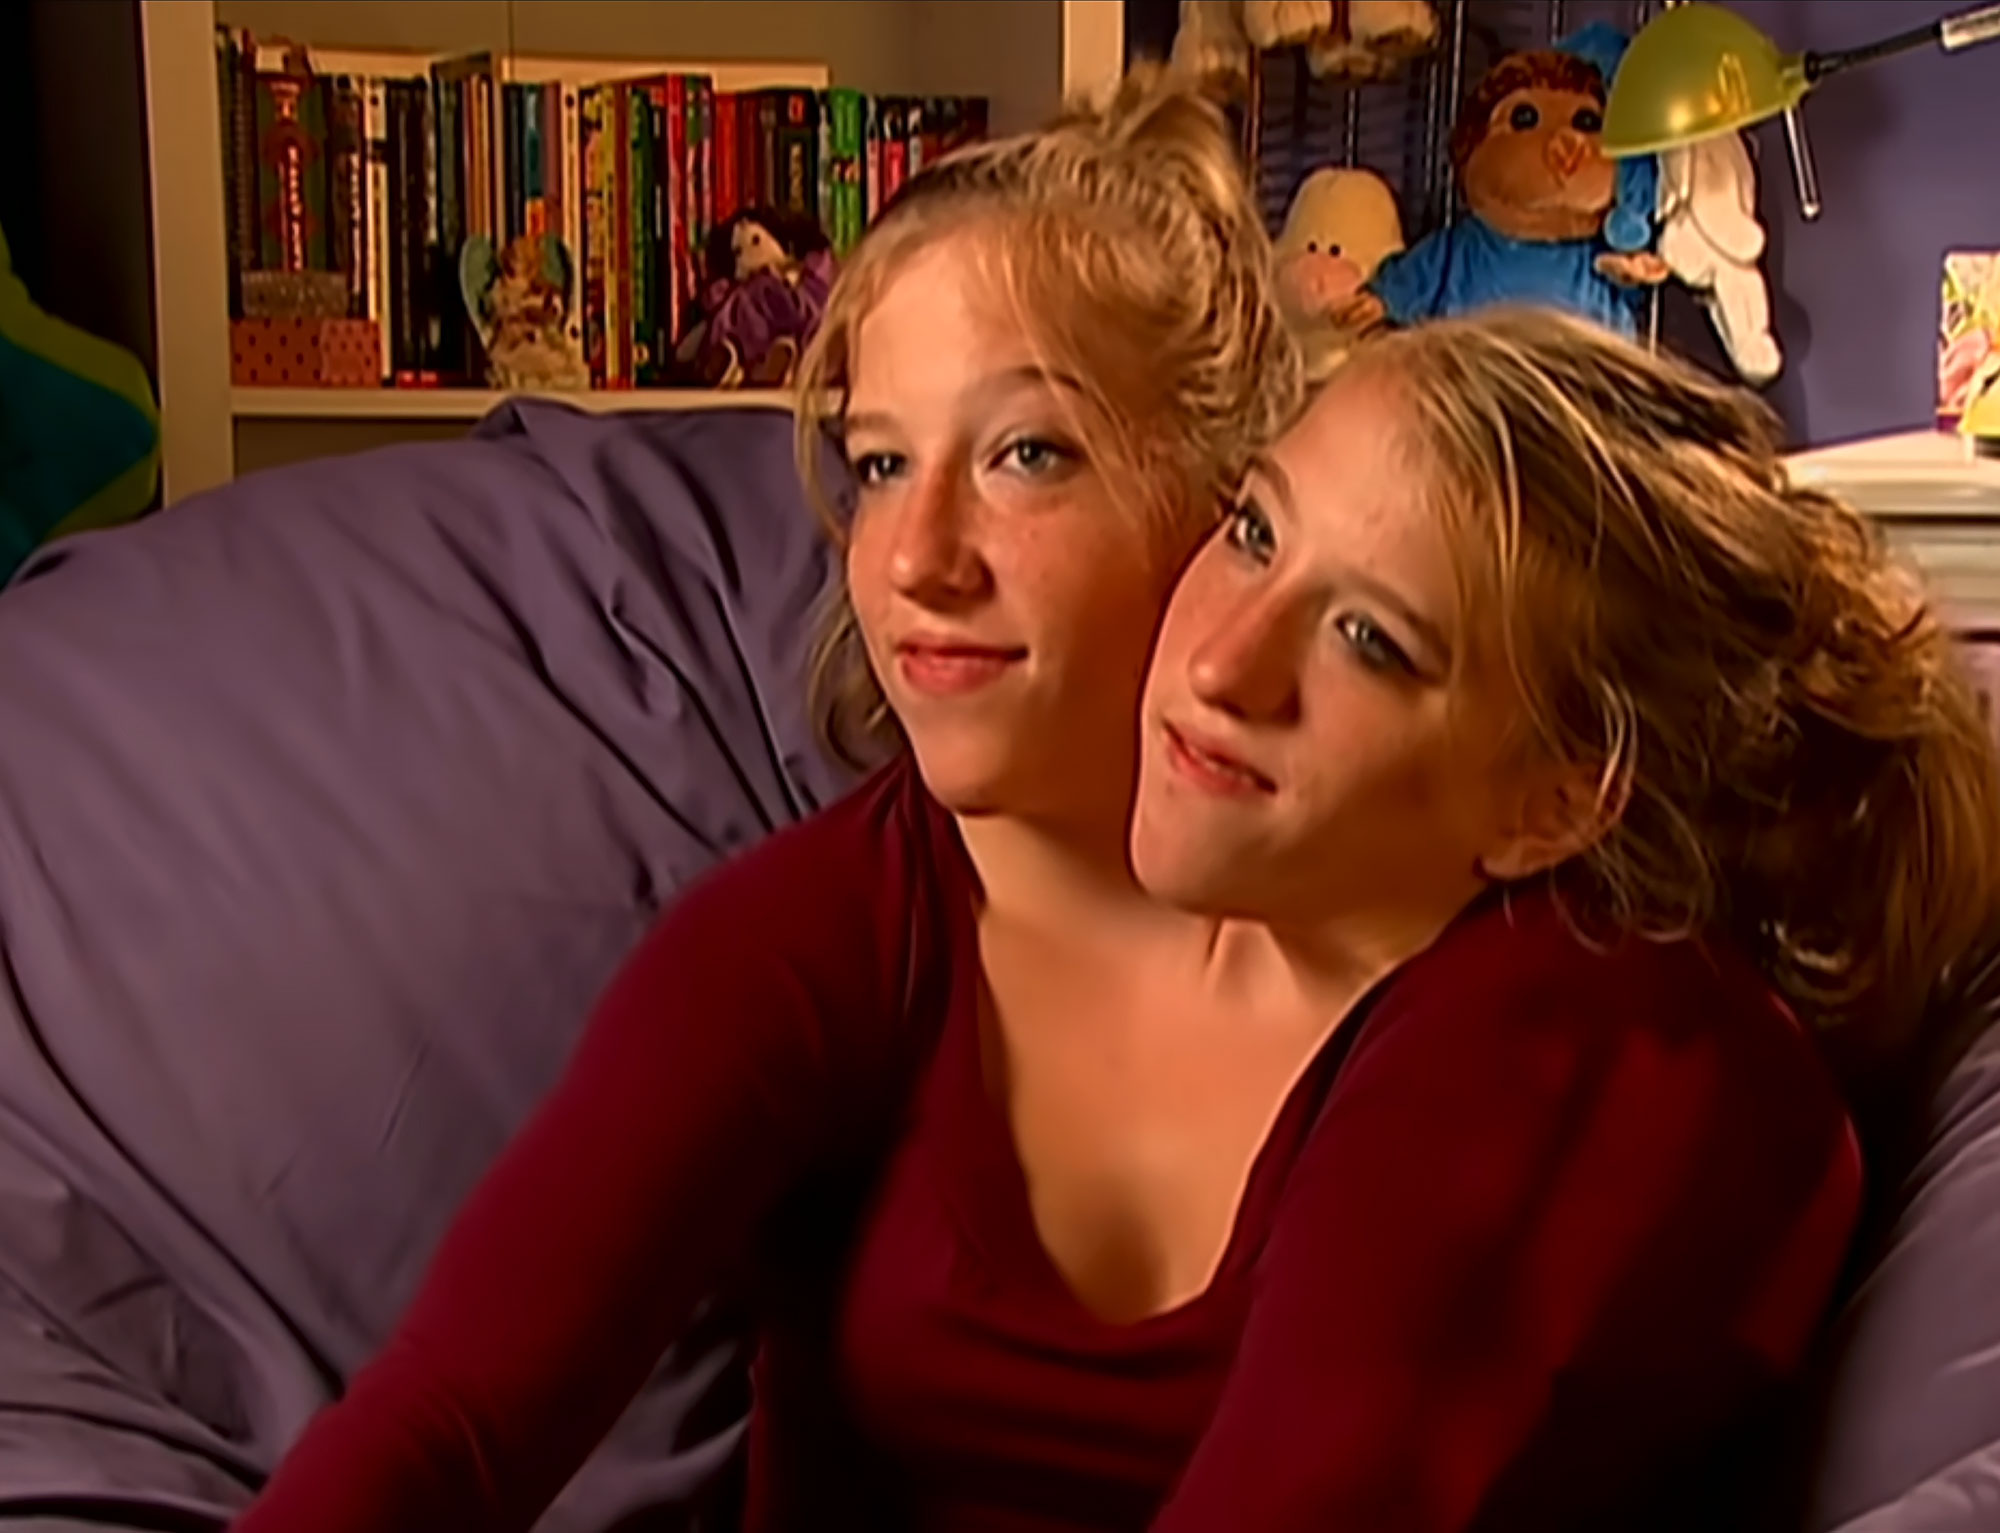 How to Watch Conjoined Twins Abby and Brittany Hensels 2012 Reality Show